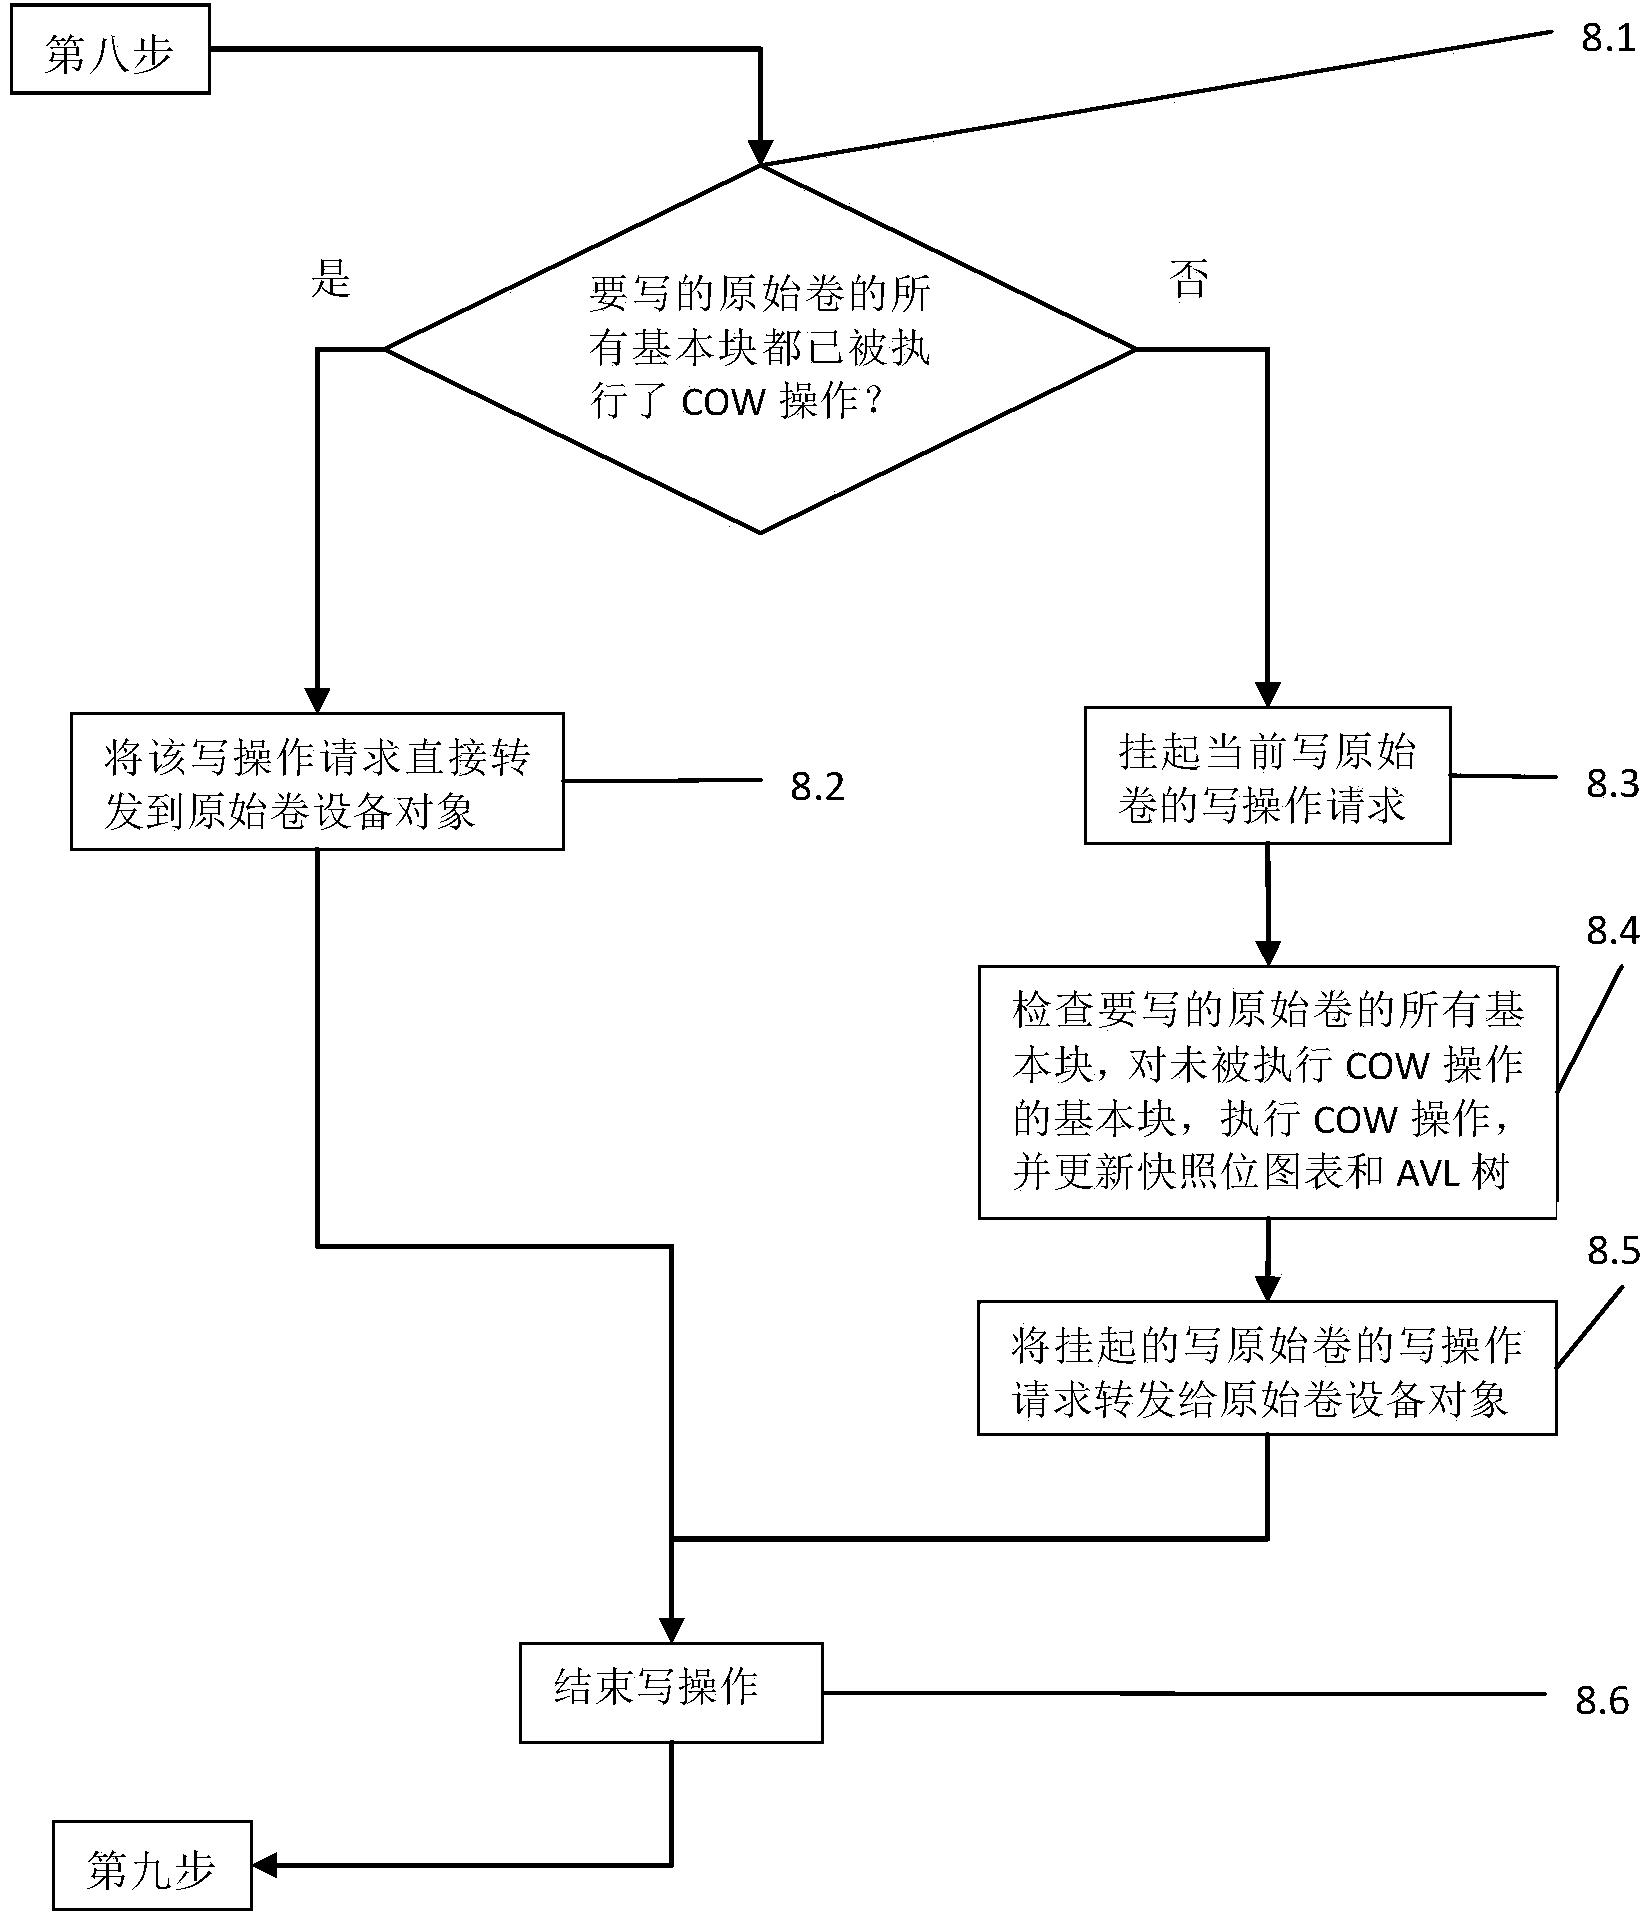 Method for running programs in isolation manner on basis of local virtualization mechanism